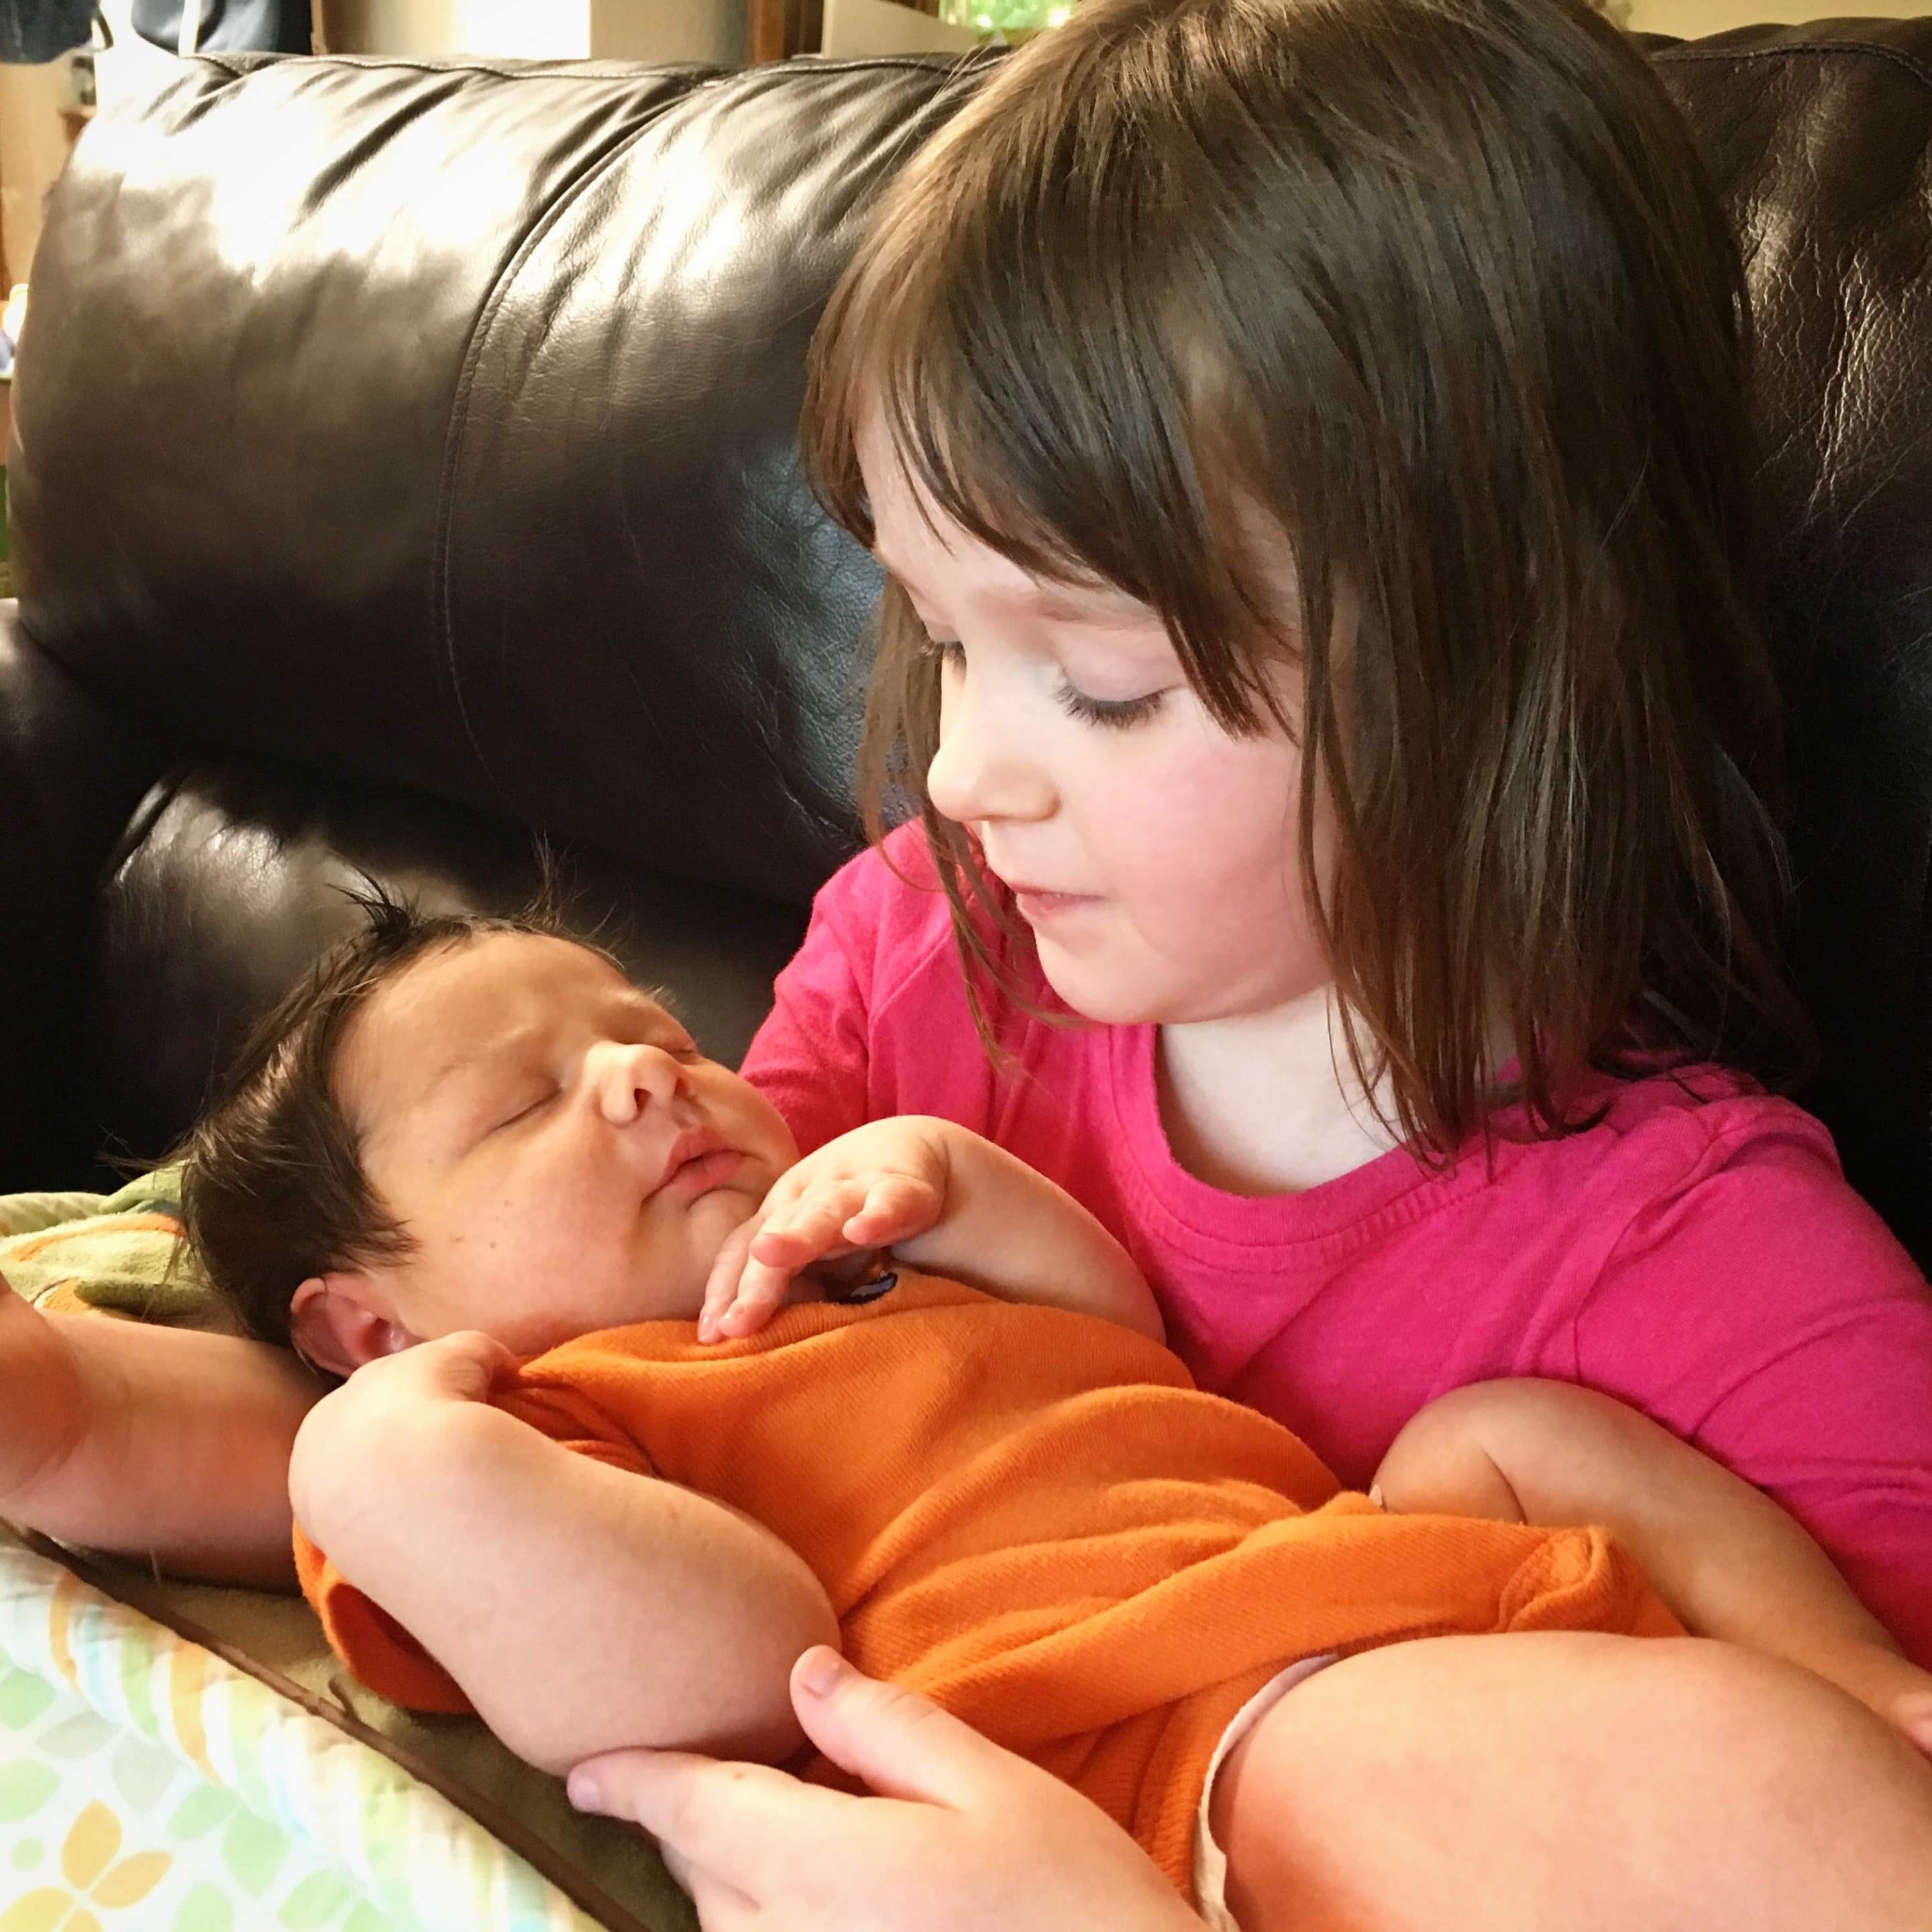 A picture of a little girl holding her baby brother.